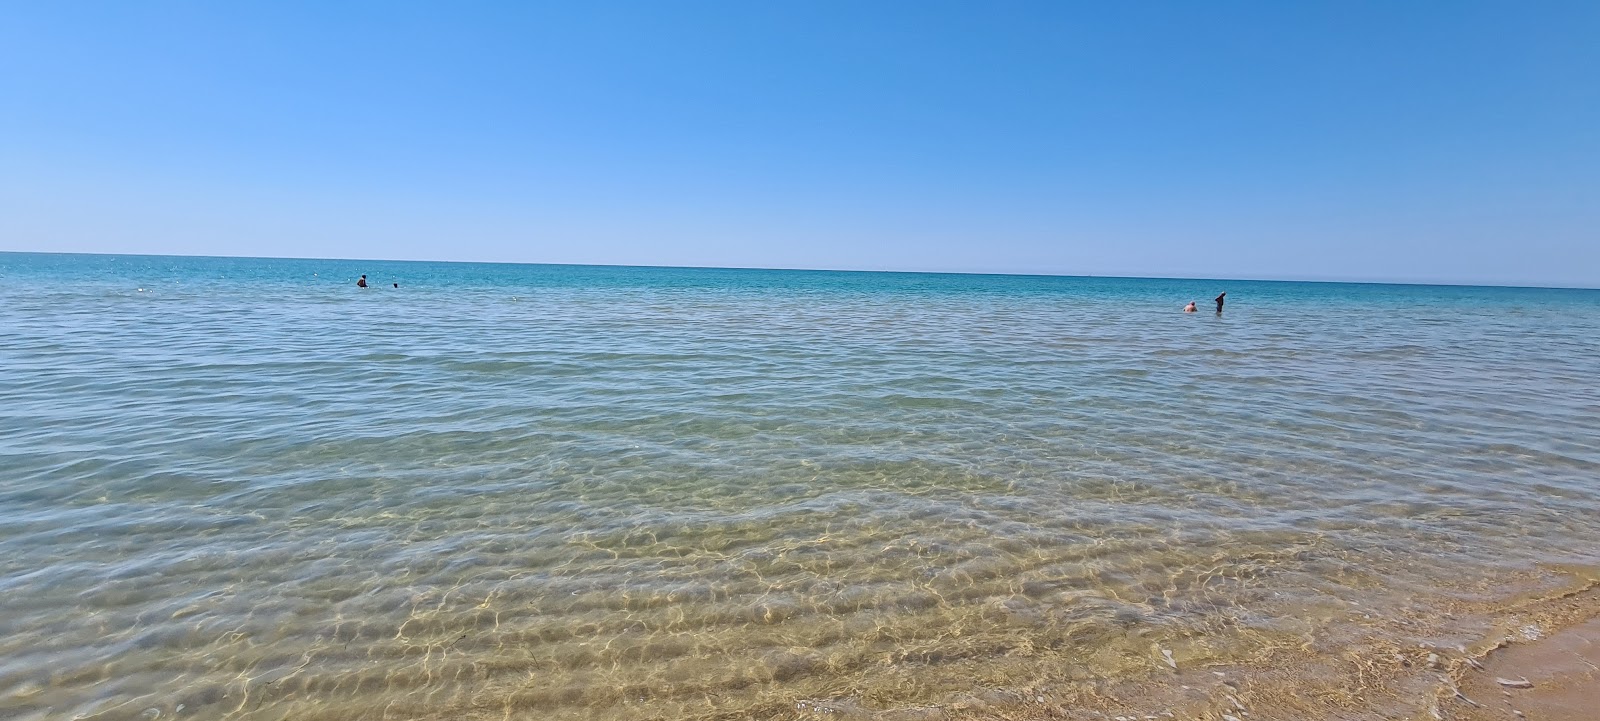 Photo of Spiaggia Roccazzelle with long straight shore